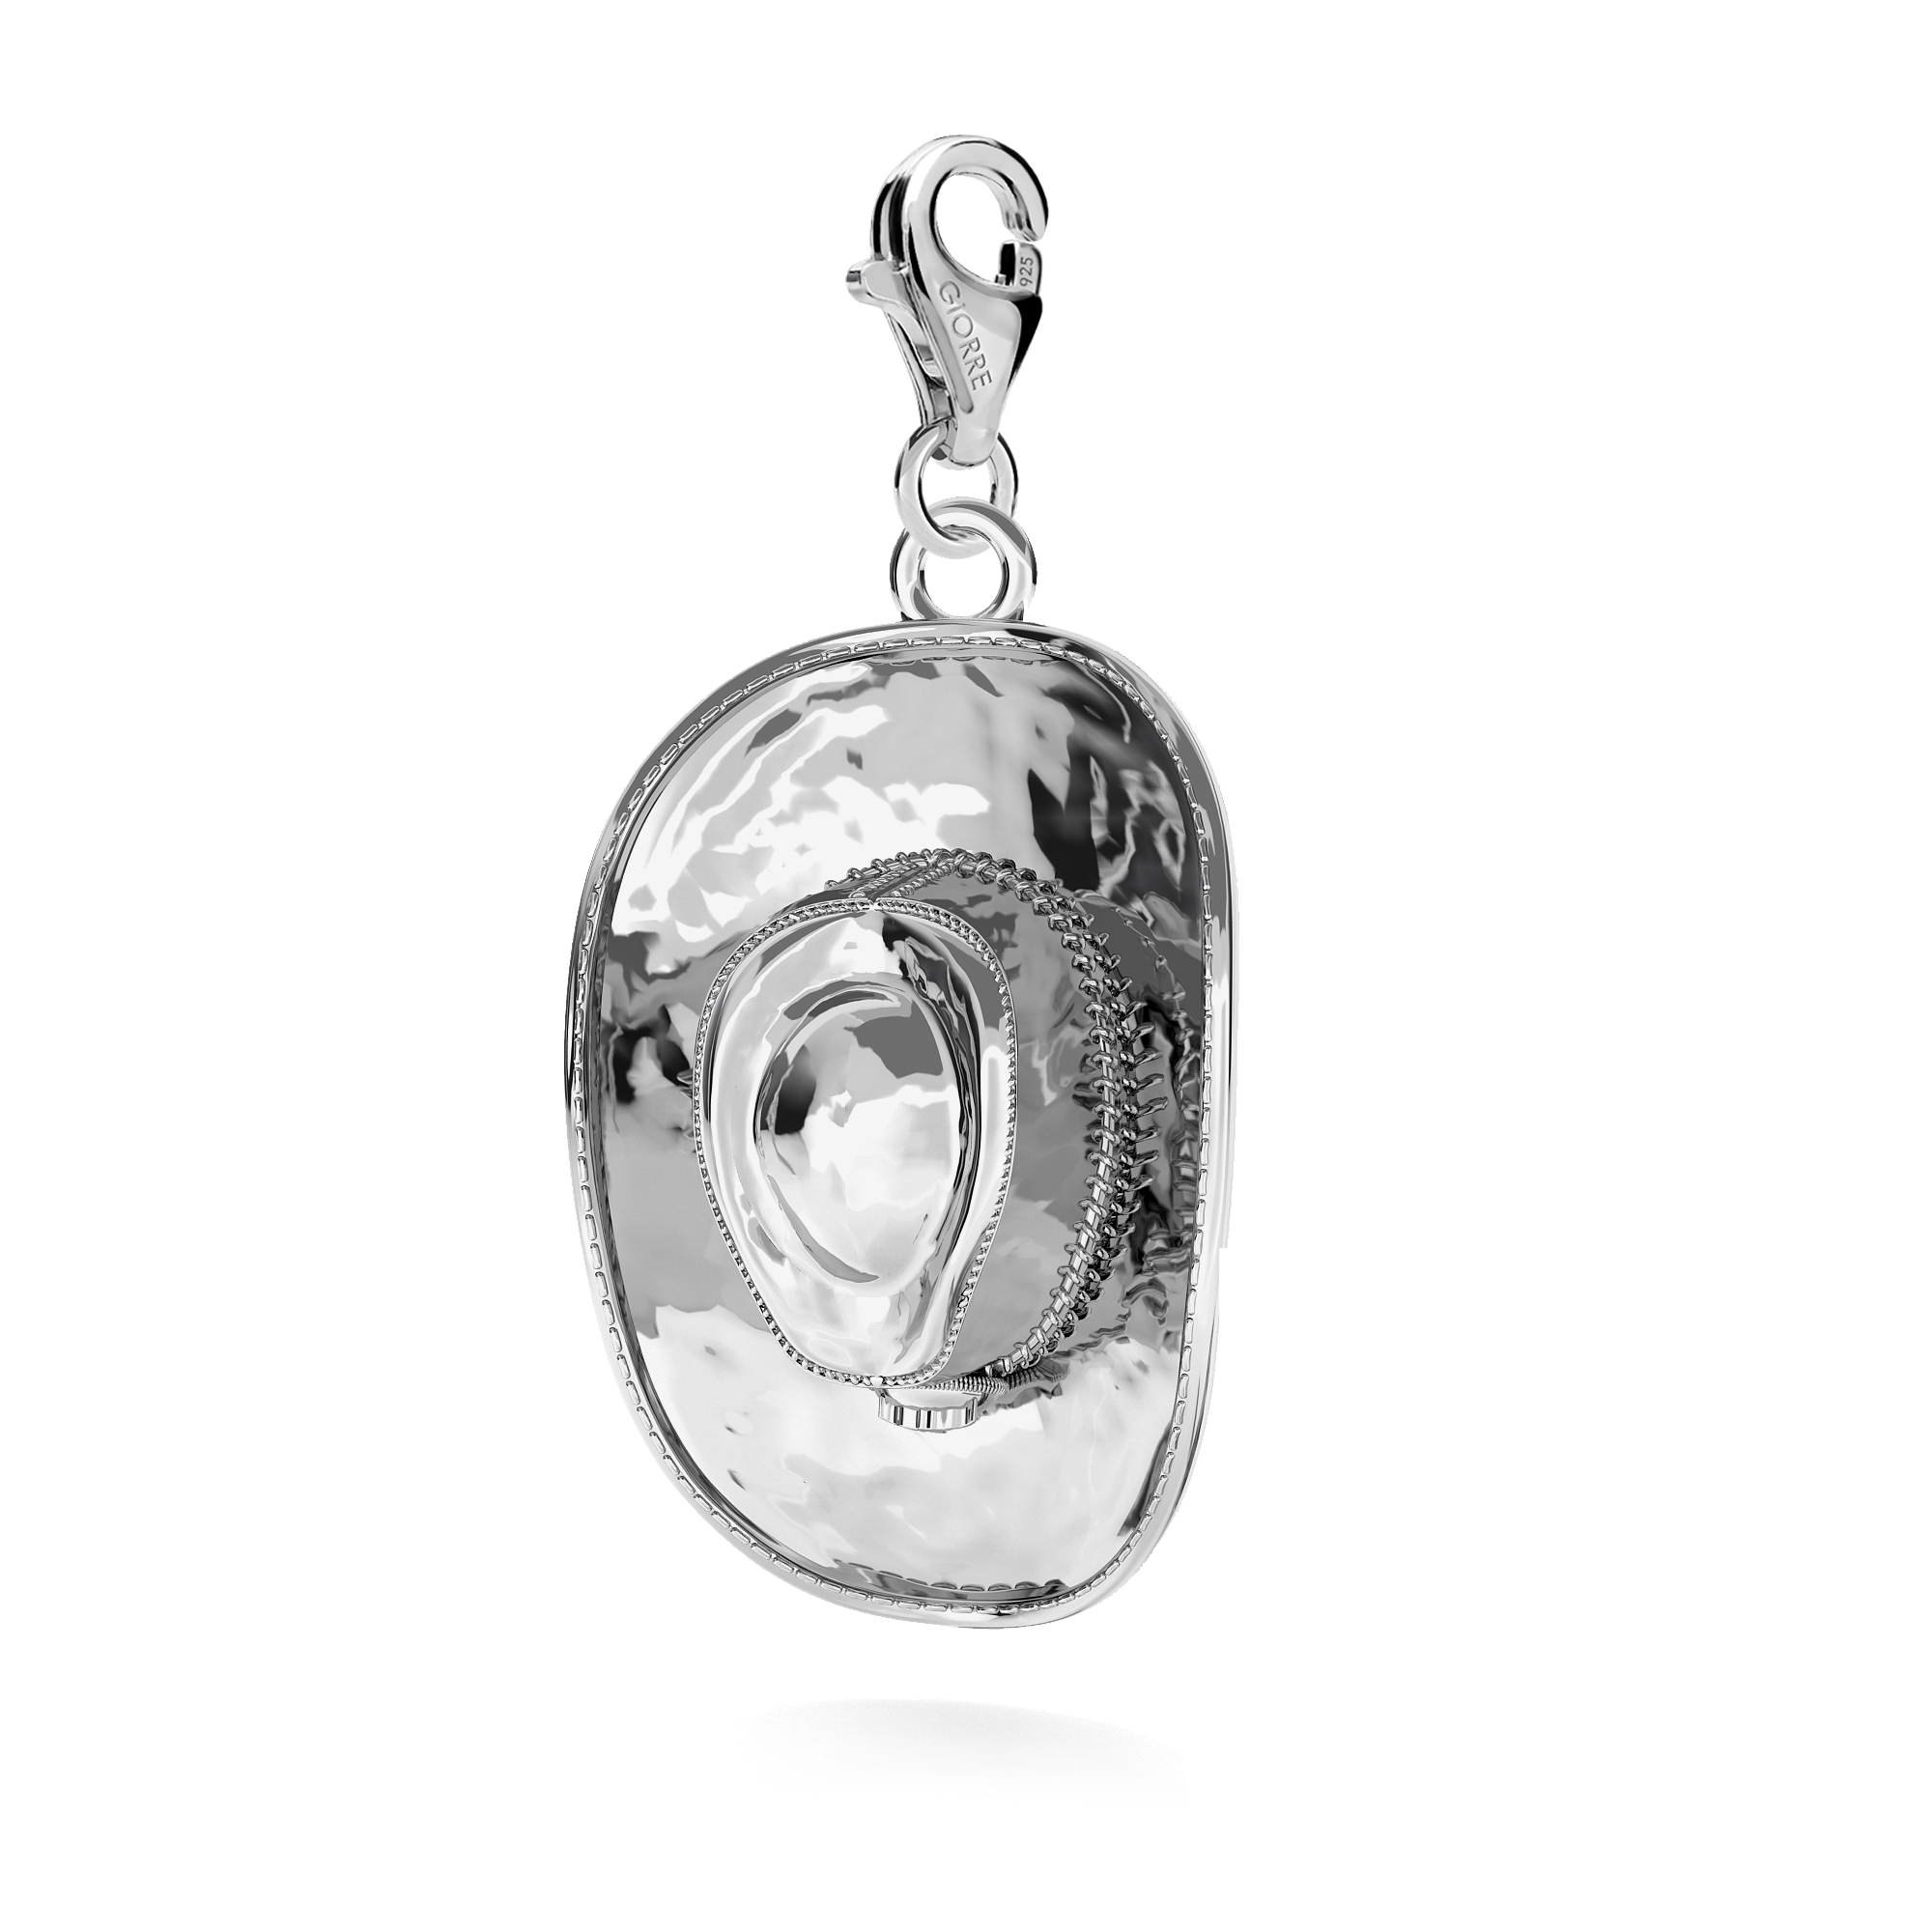 REVOLVER PENDANT CHARMS BEAD STERLING SILVER